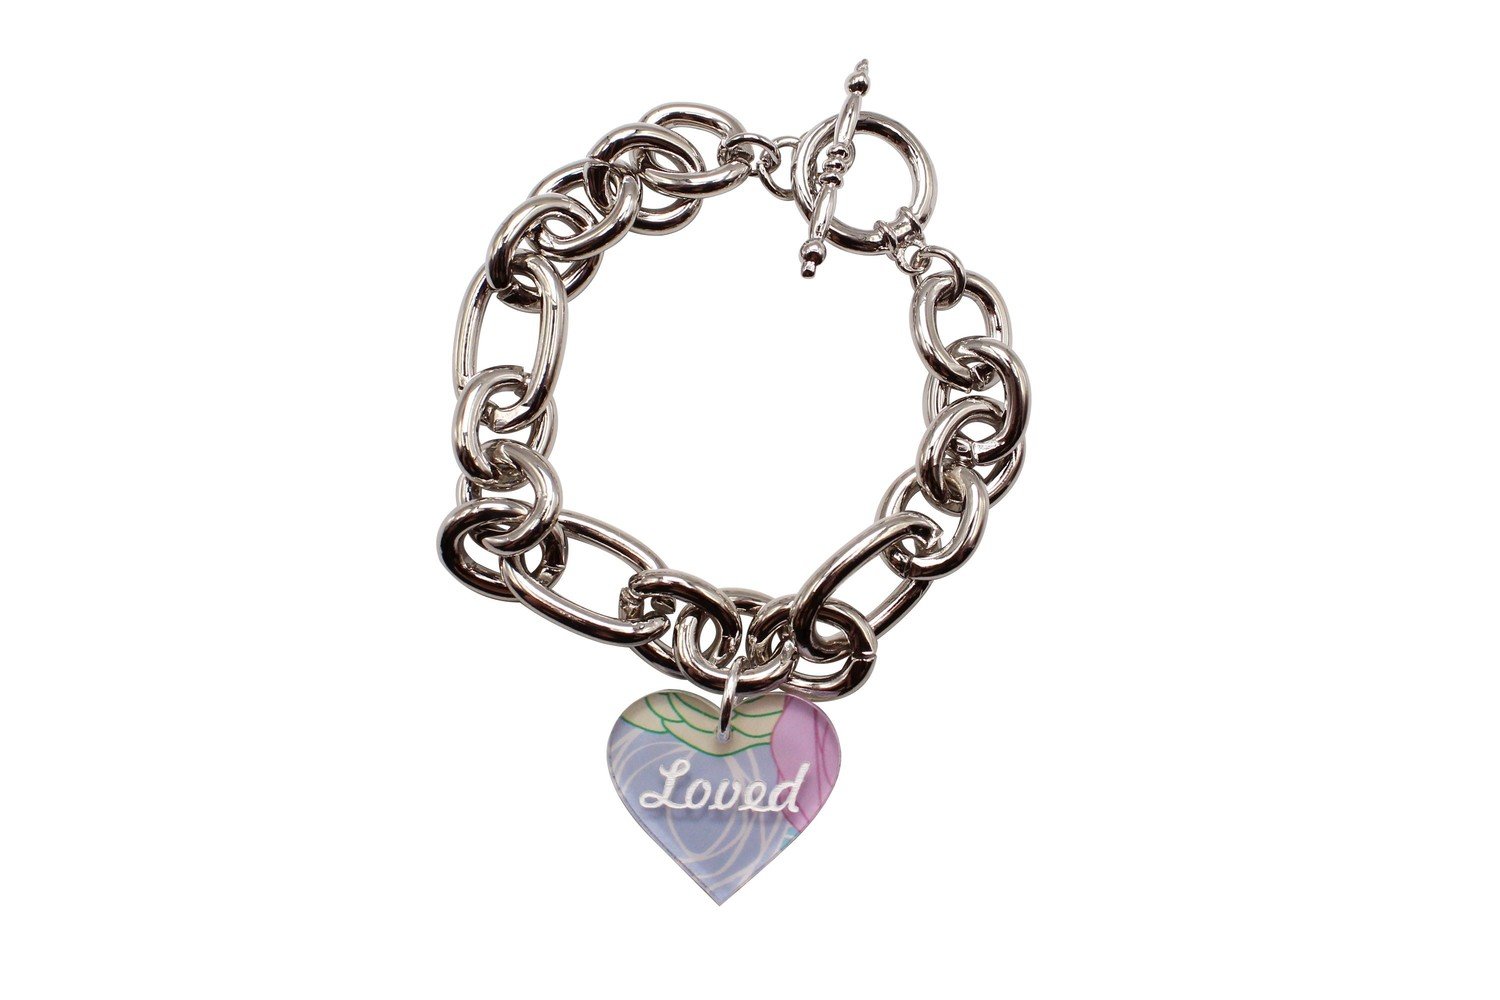 Custom Heart Charm with Name or Saying on Decorative Rope Chain